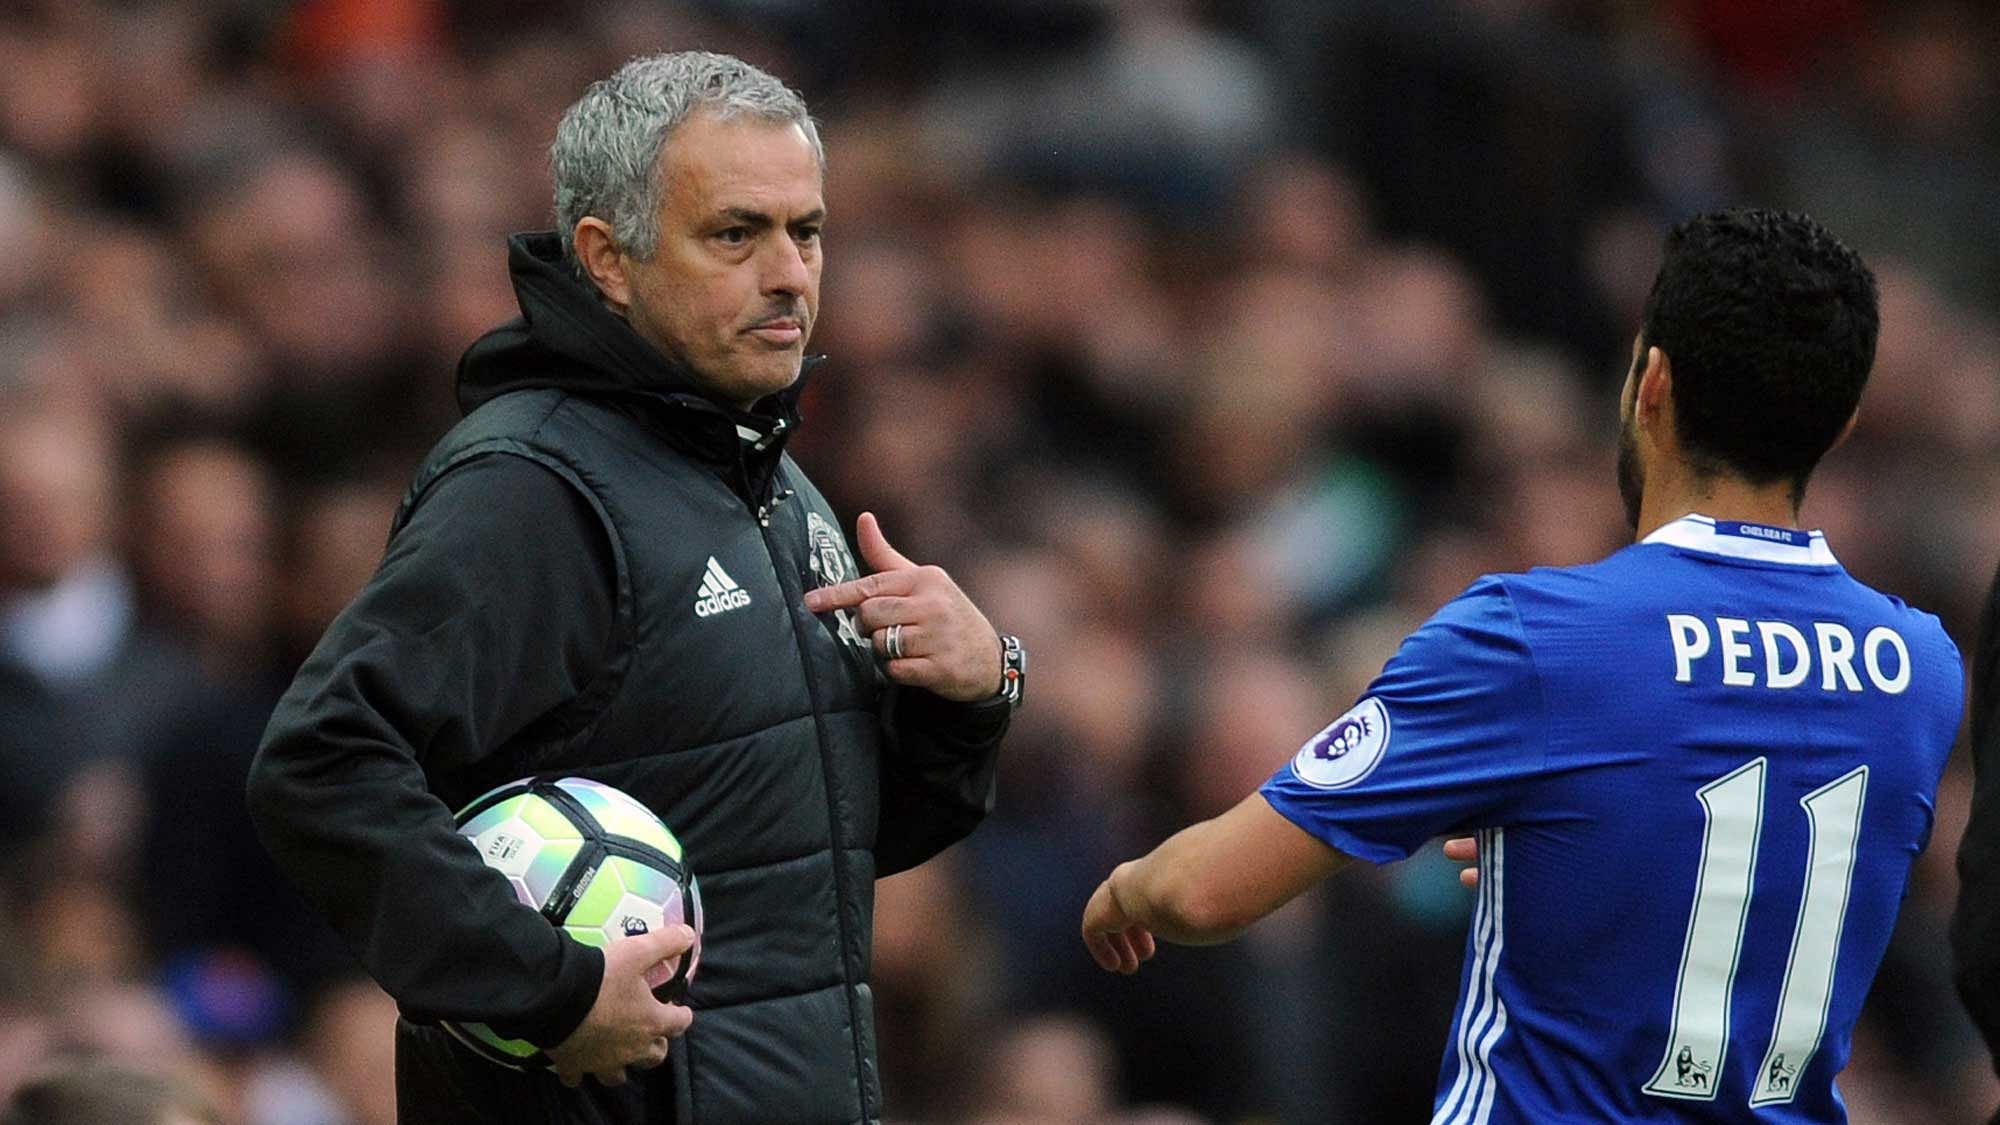 Manchester United’s team manager Jose Mourinho, left, talks to Chelsea’s Pedro during the English Premier League match between Manchester United and Chelsea at Old Trafford. (Photo: AP)